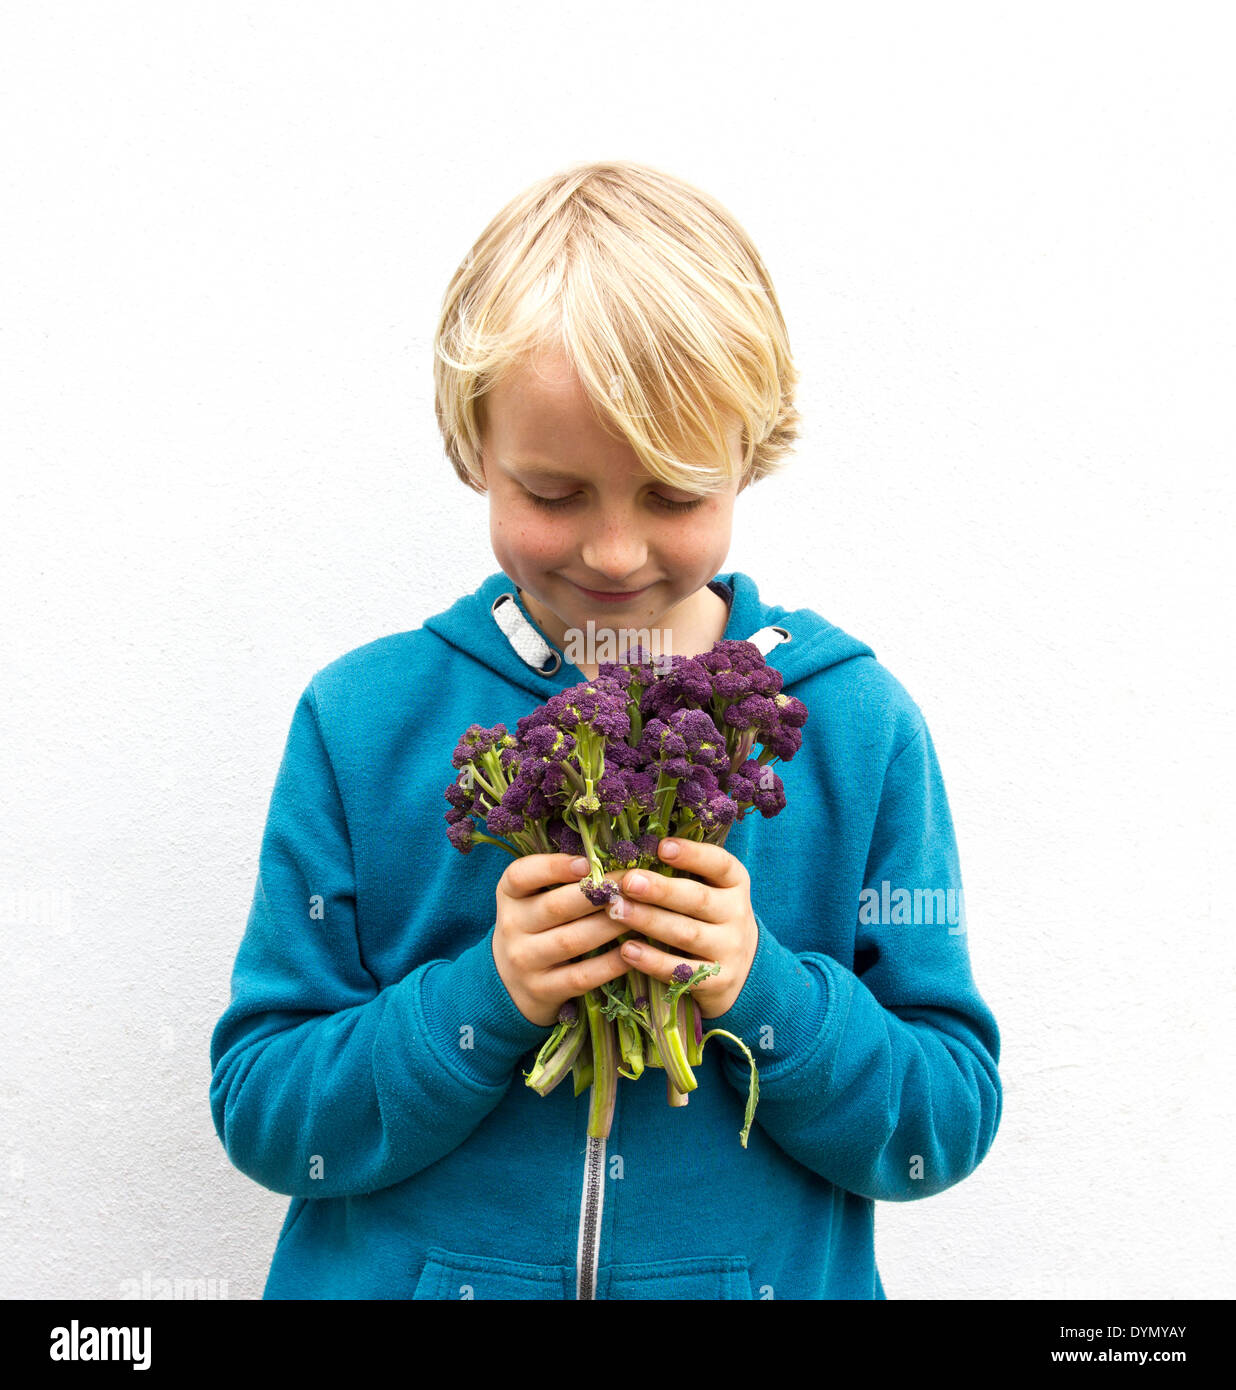 Blond boy with freckles wearing a blue top holding a bunch of purple sprouting broccoli Stock Photo